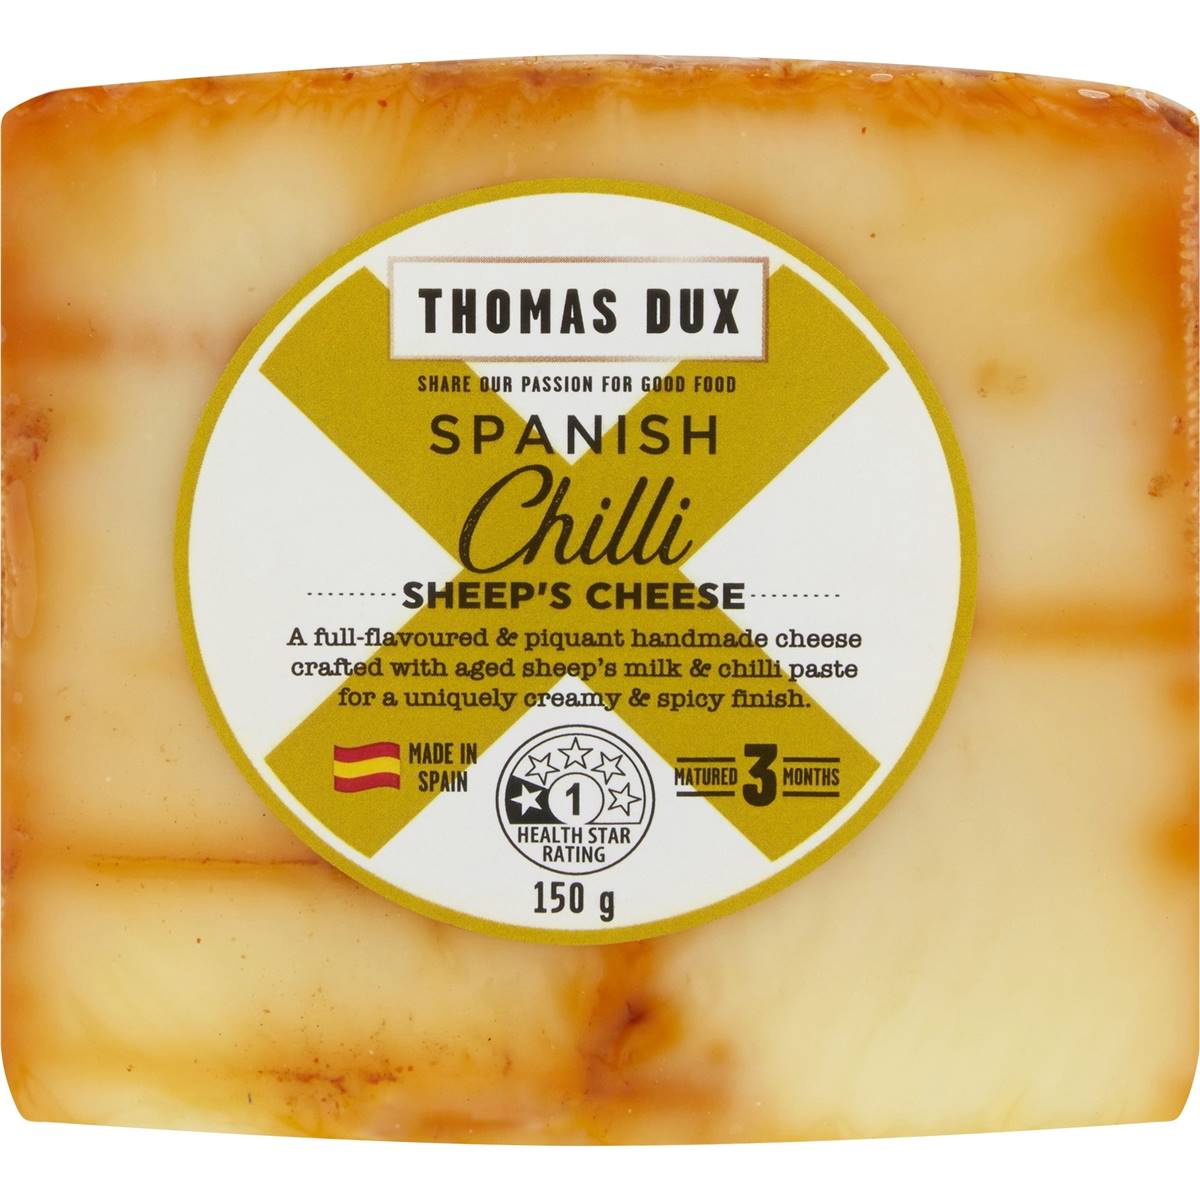 Calories in Thomas Dux Spanish Chilli Sheep's Cheese